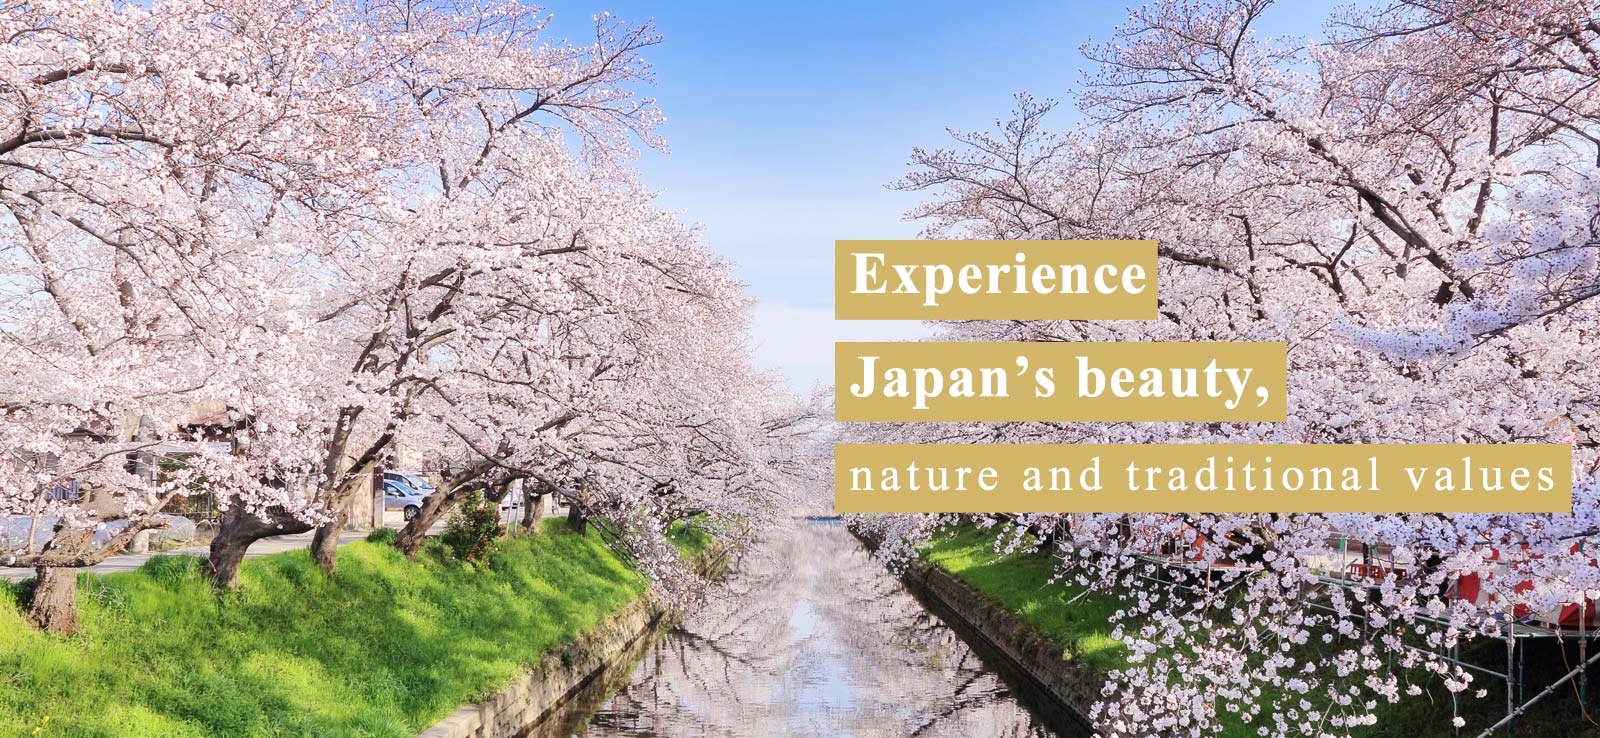 Japan is full of beautiful natural scenery and traditional culture.